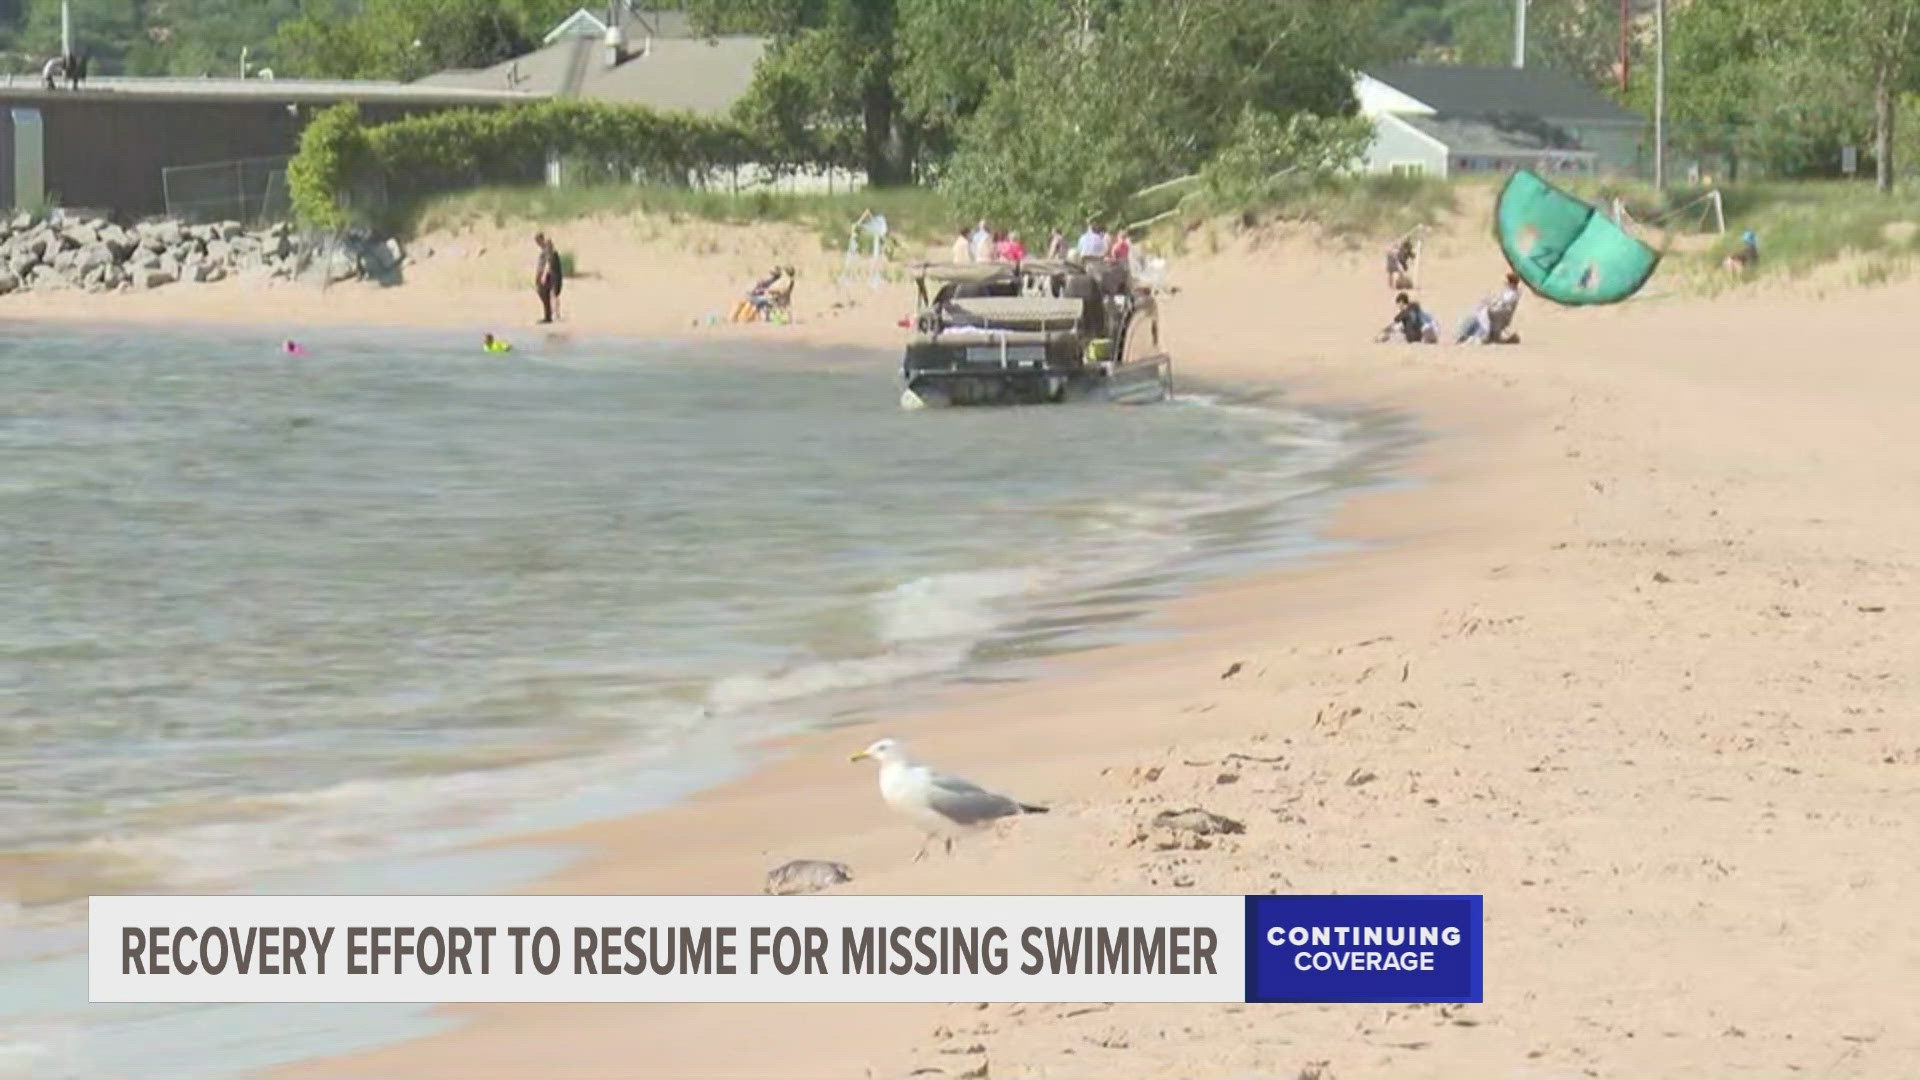 The Muskegon Fire Department has officially called off their search for a 21-year-old Ann Arbor man believed to have drowned off of Pere Marquette beach this weekend